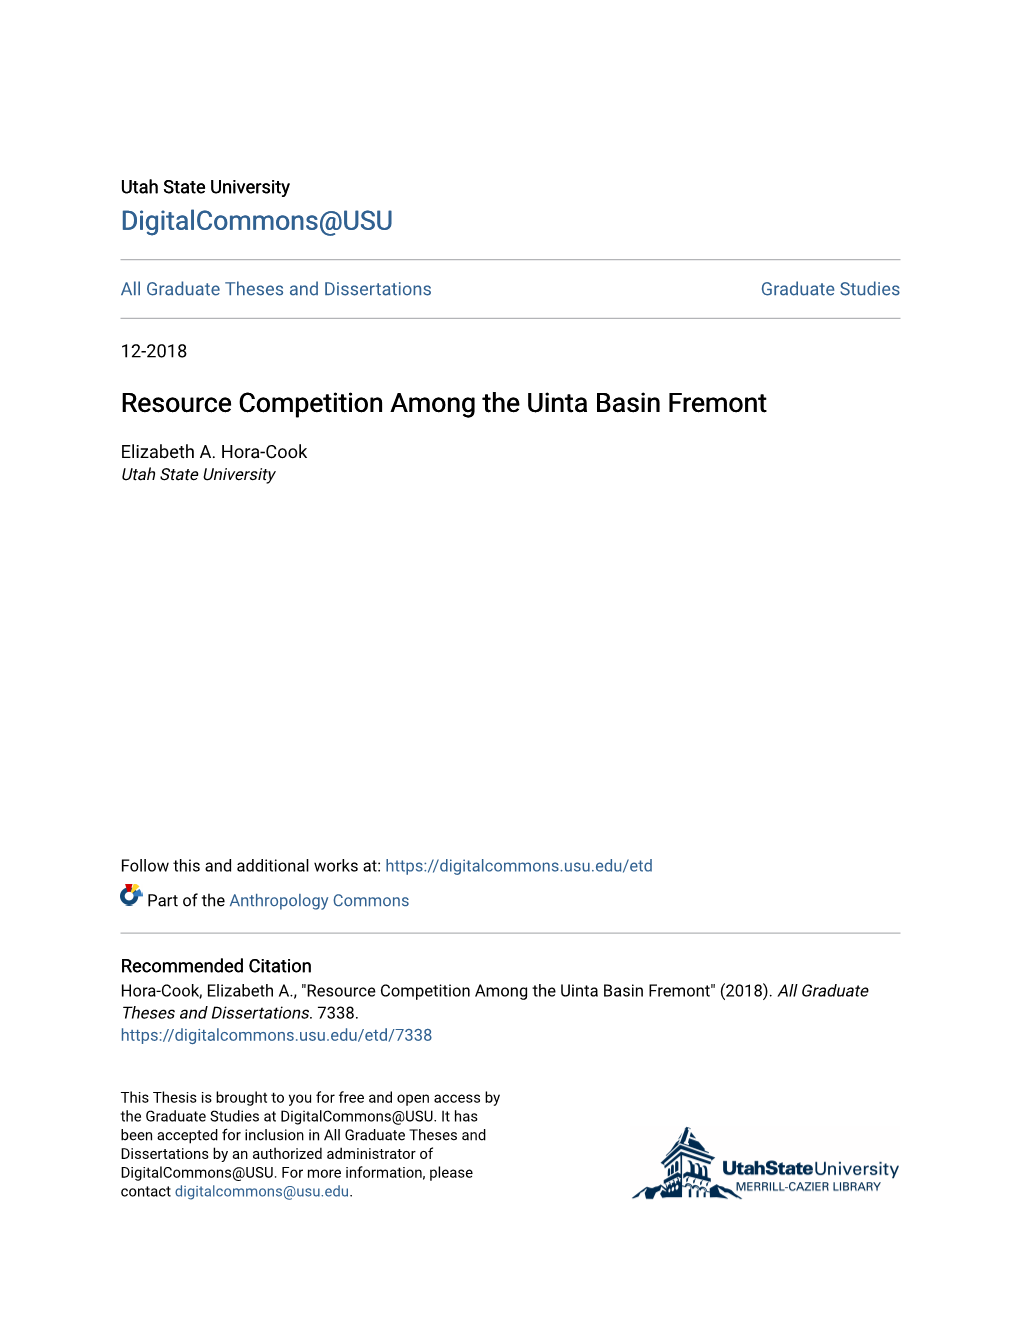 Resource Competition Among the Uinta Basin Fremont